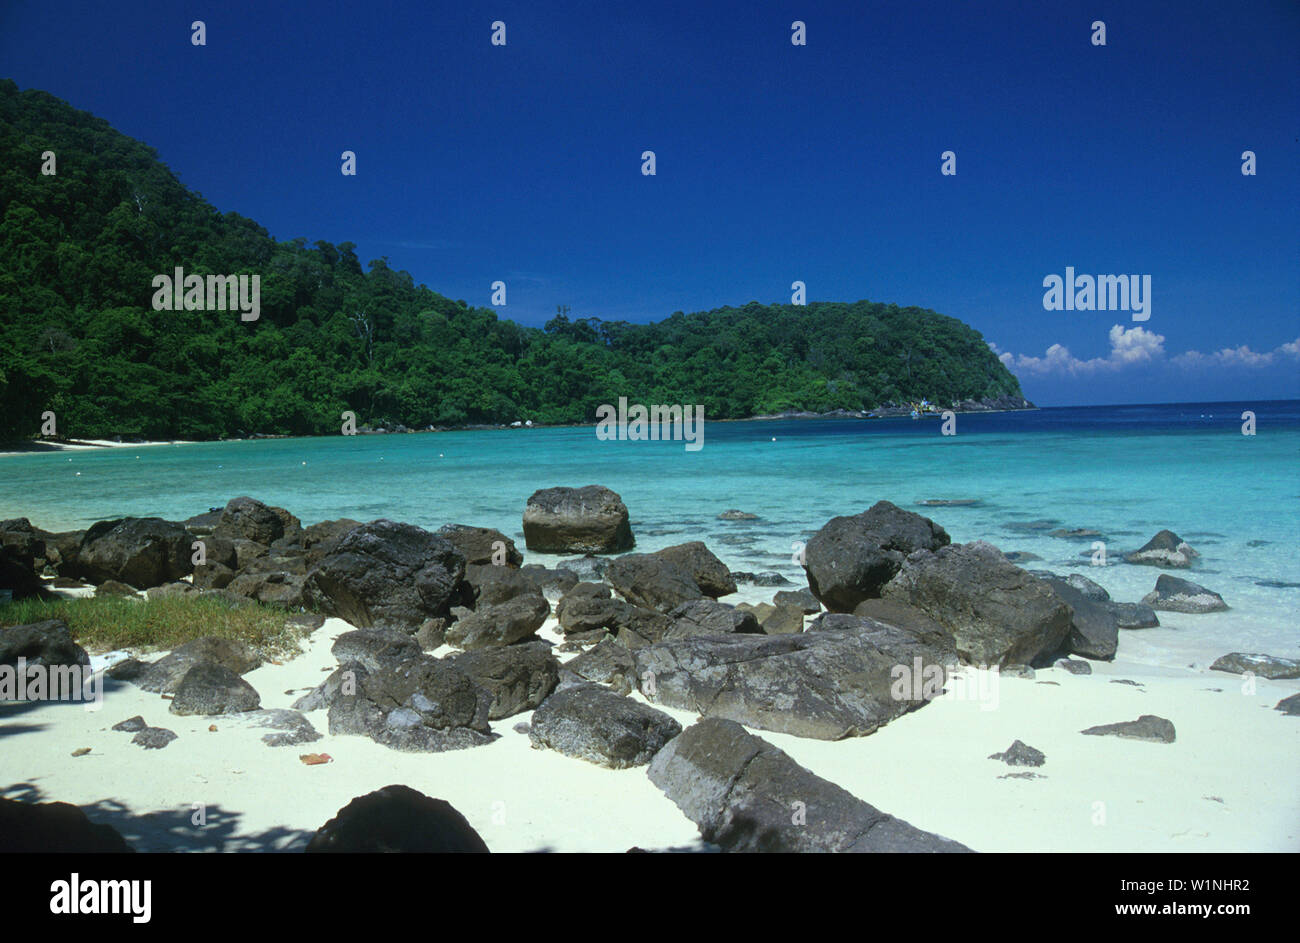 Palau Tengol, Insel, Malaysia Suedchinesisches Meer, Released Stock Photo